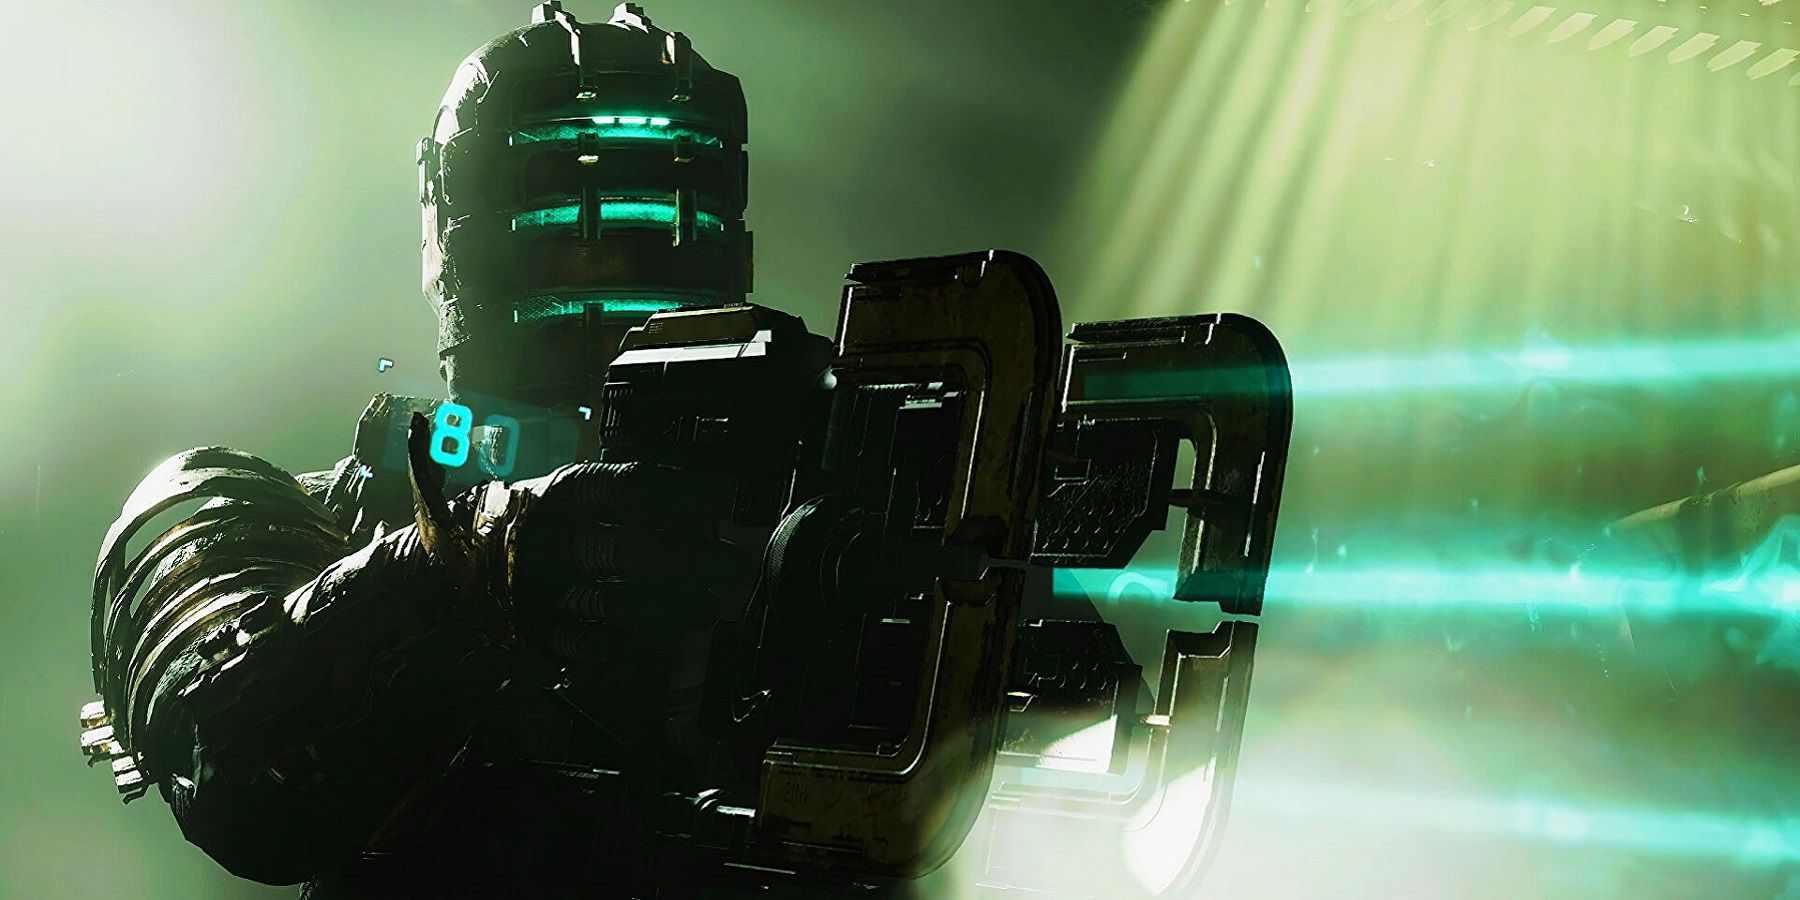 Image from Dead Space showing Issac Clarke holding the plasma cutter.